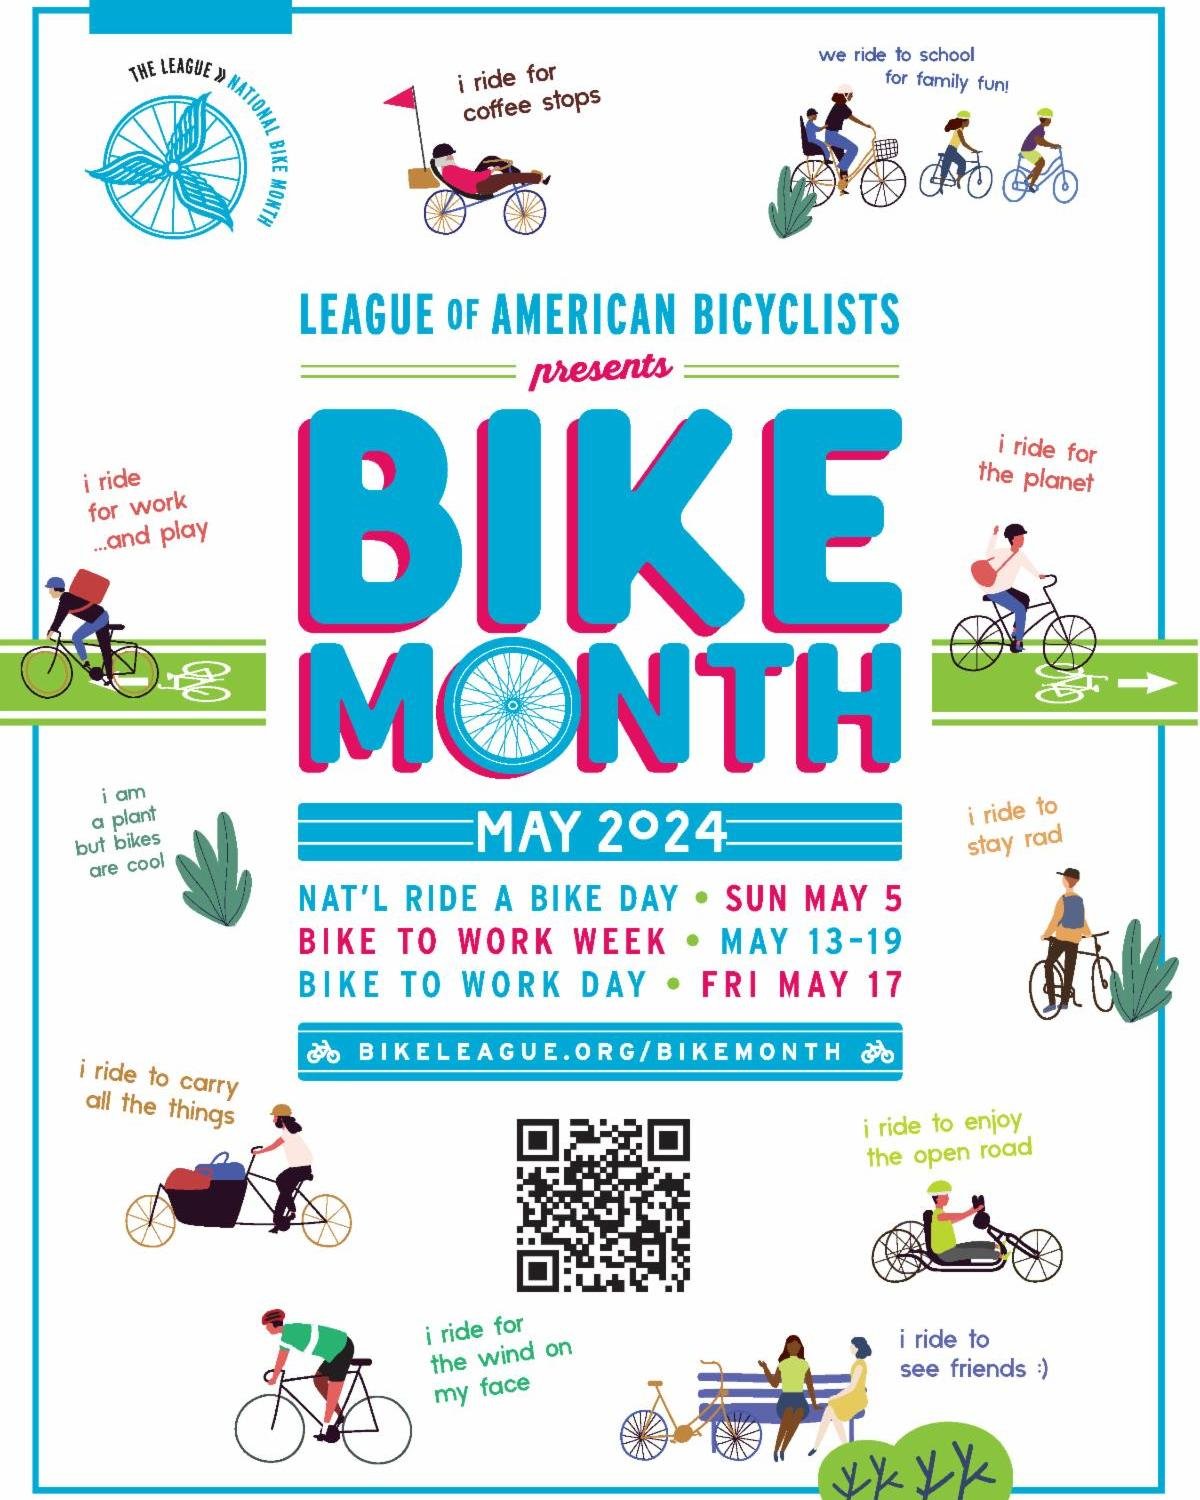 It's officially BIKE MONTH! Join in on the celebrations that take place throughout the month of May:

- National Ride a Bike Day- May 5th
- Bike and Roll to School Day- May 8
- Bike to Work Week- May 13-19
- Bike to Work Day- May 17

Bike month is an